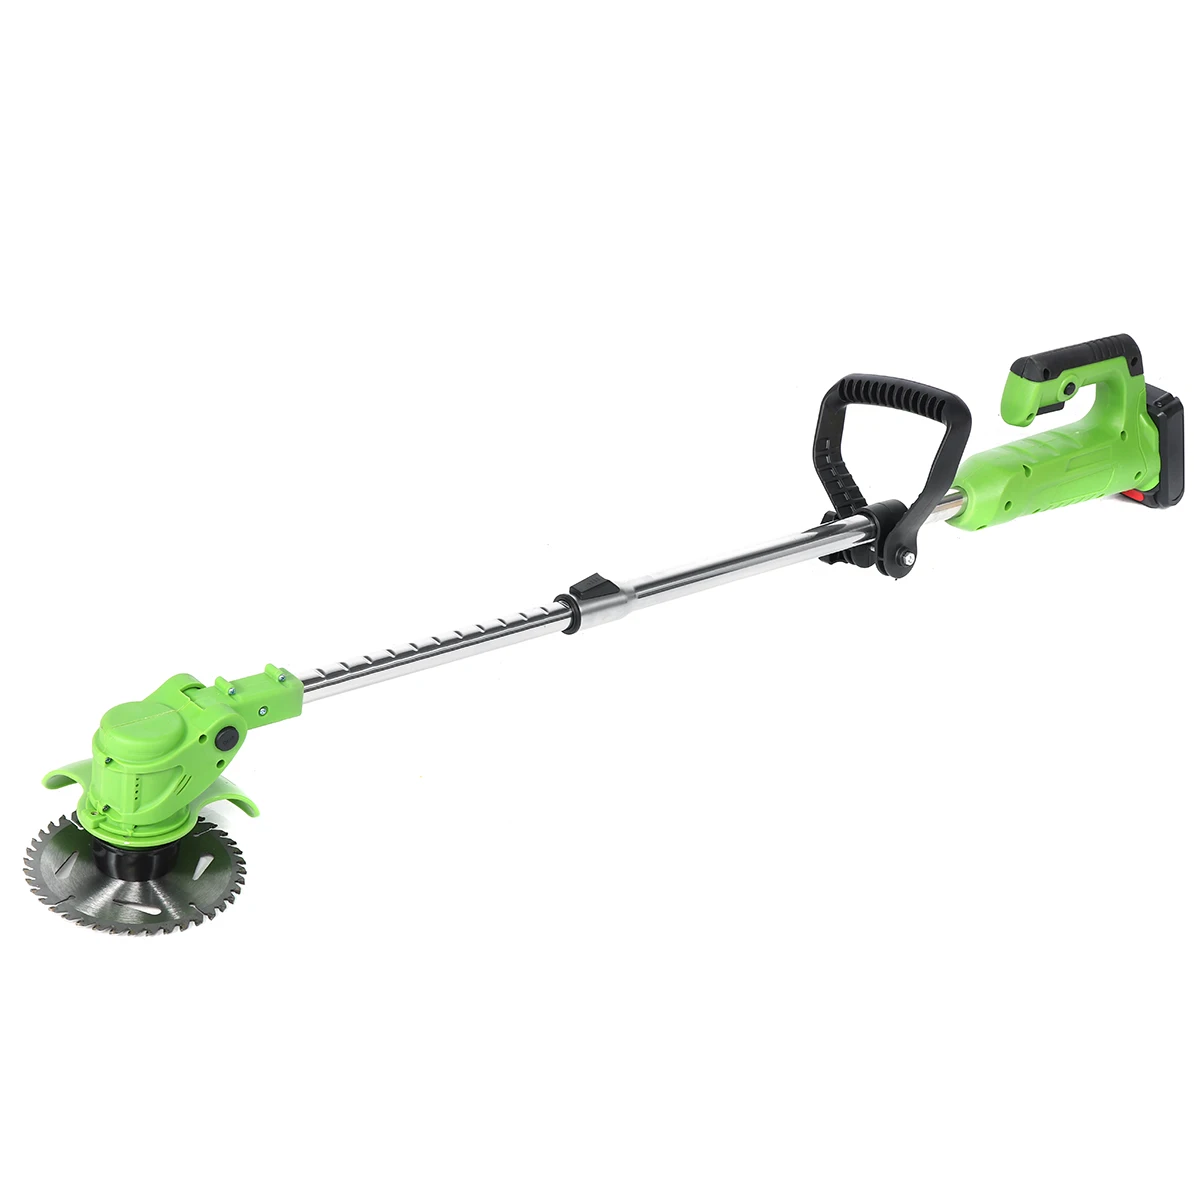 12V 24V Electric Grass Trimmer Cordless Lawn Mower Hedge Trimmer Grass Cutter Pruning Garden Power Tools With 2 Li-ion Battery